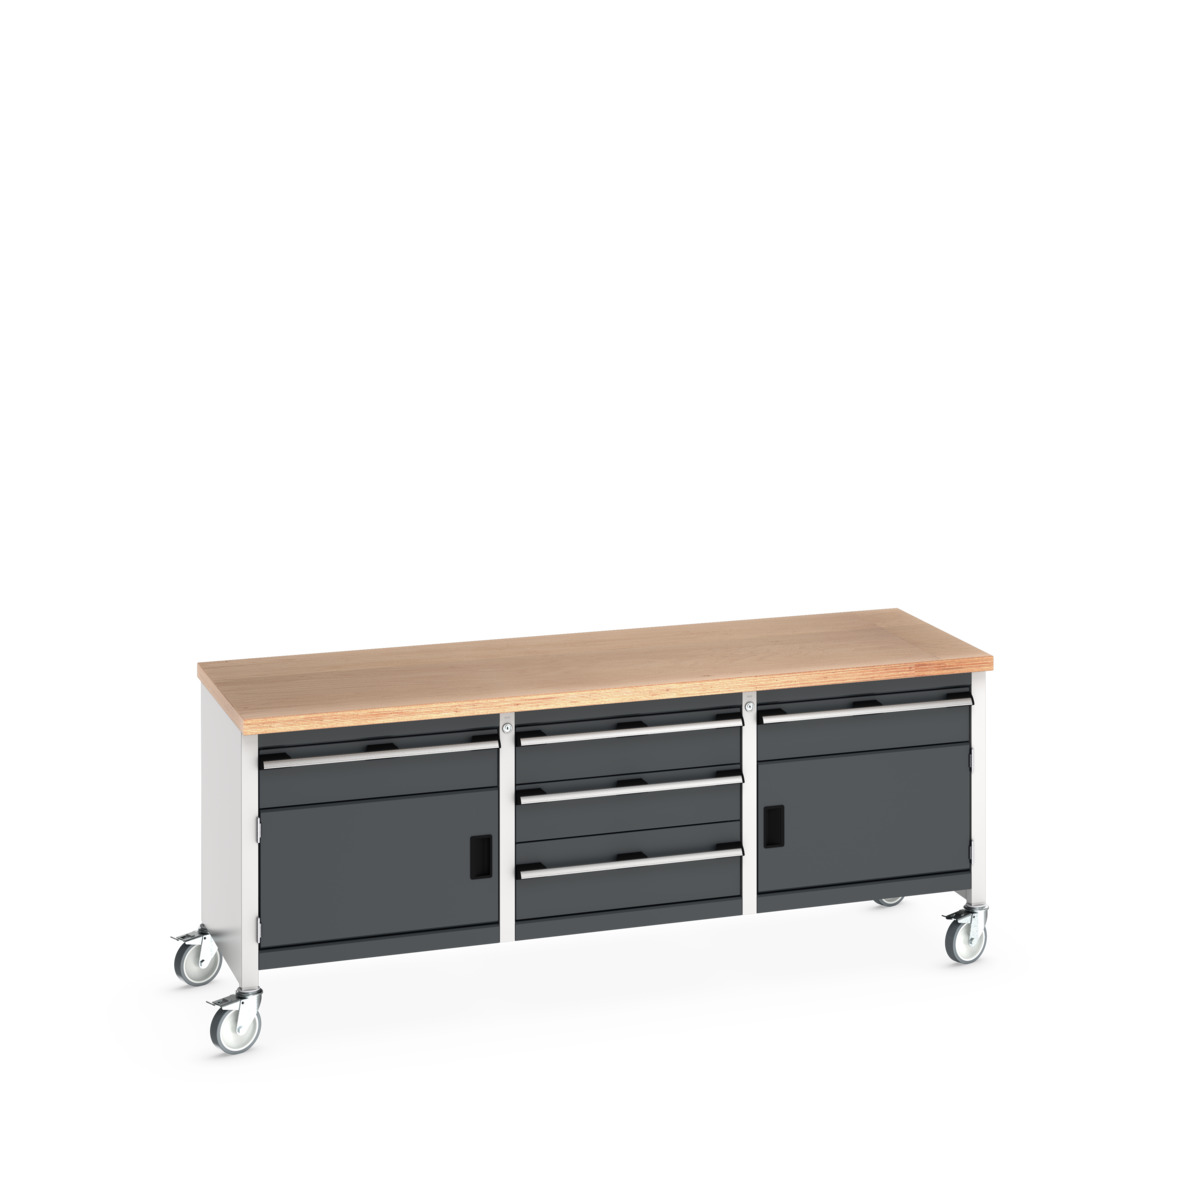 41002133.19V - cubio mobile storage bench (mpx)